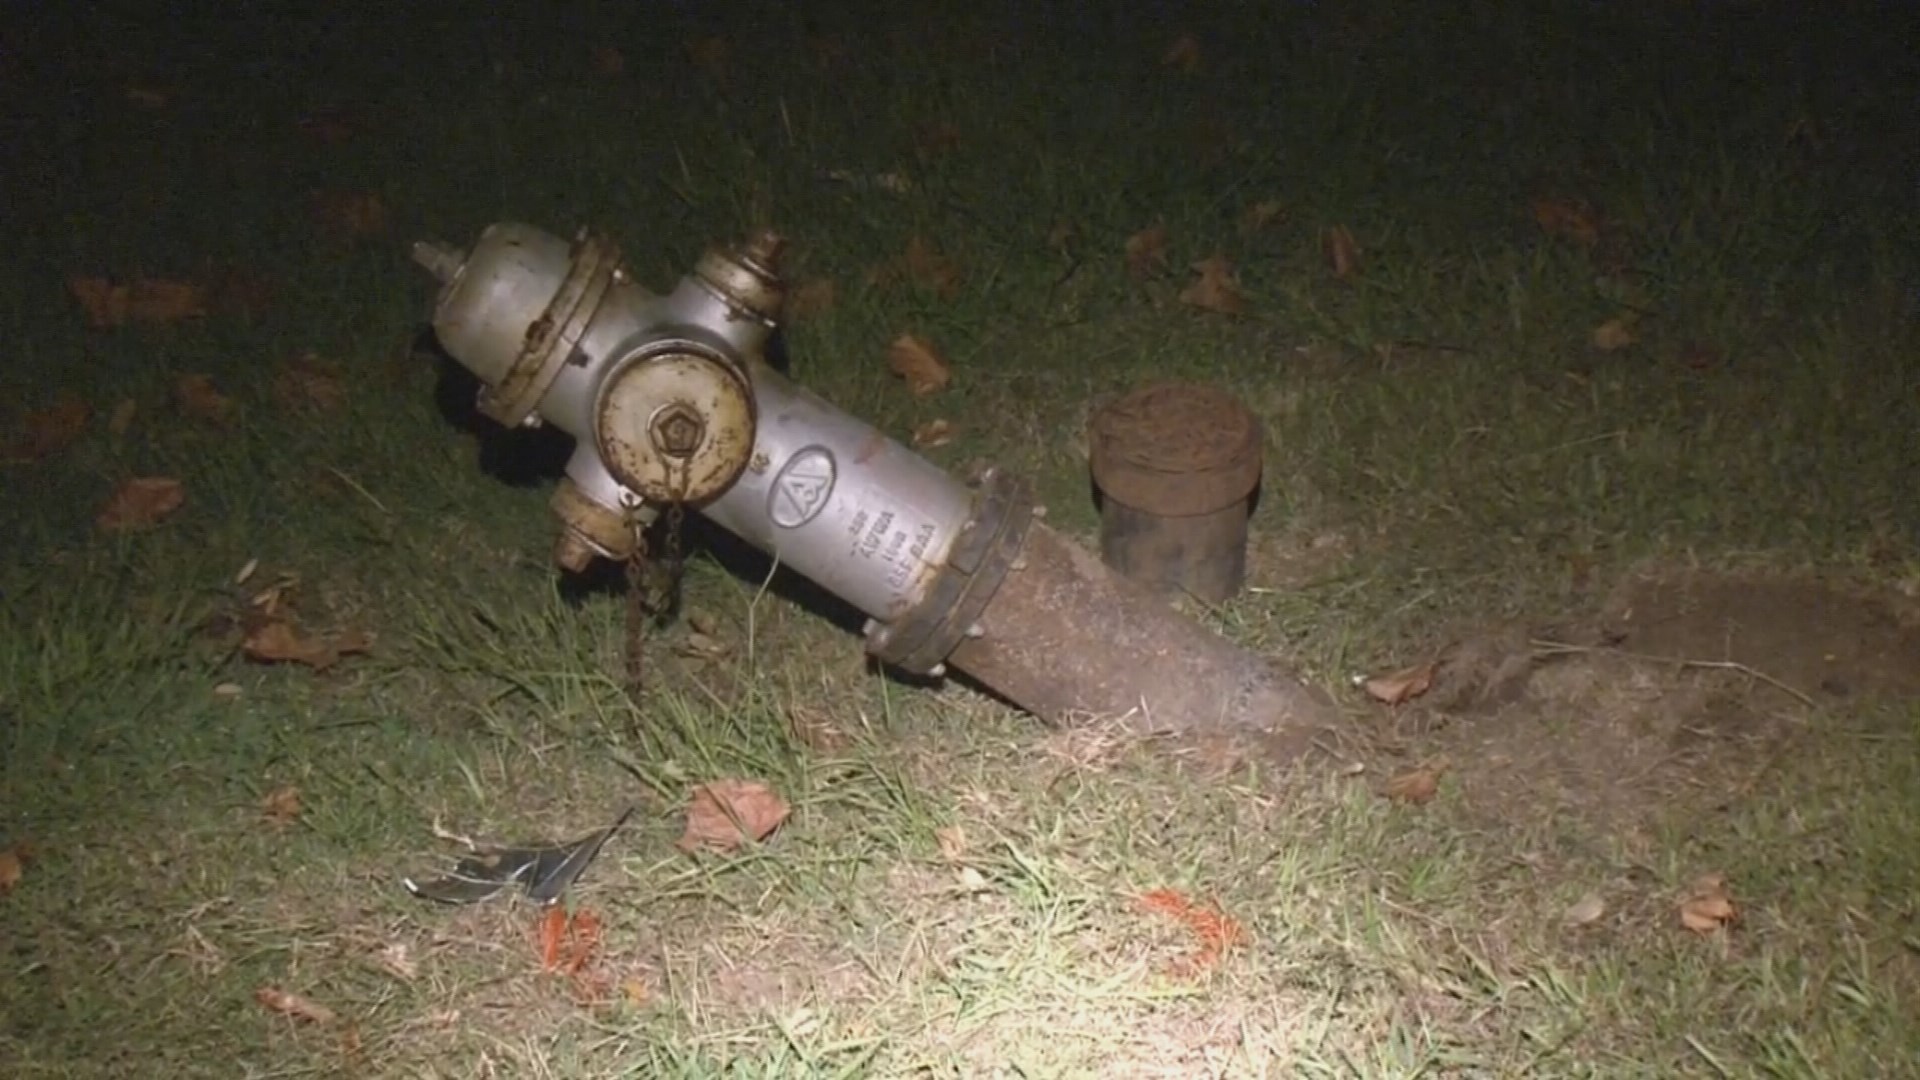 Motorcyclist critical following crash into fire hydrant in Baytown